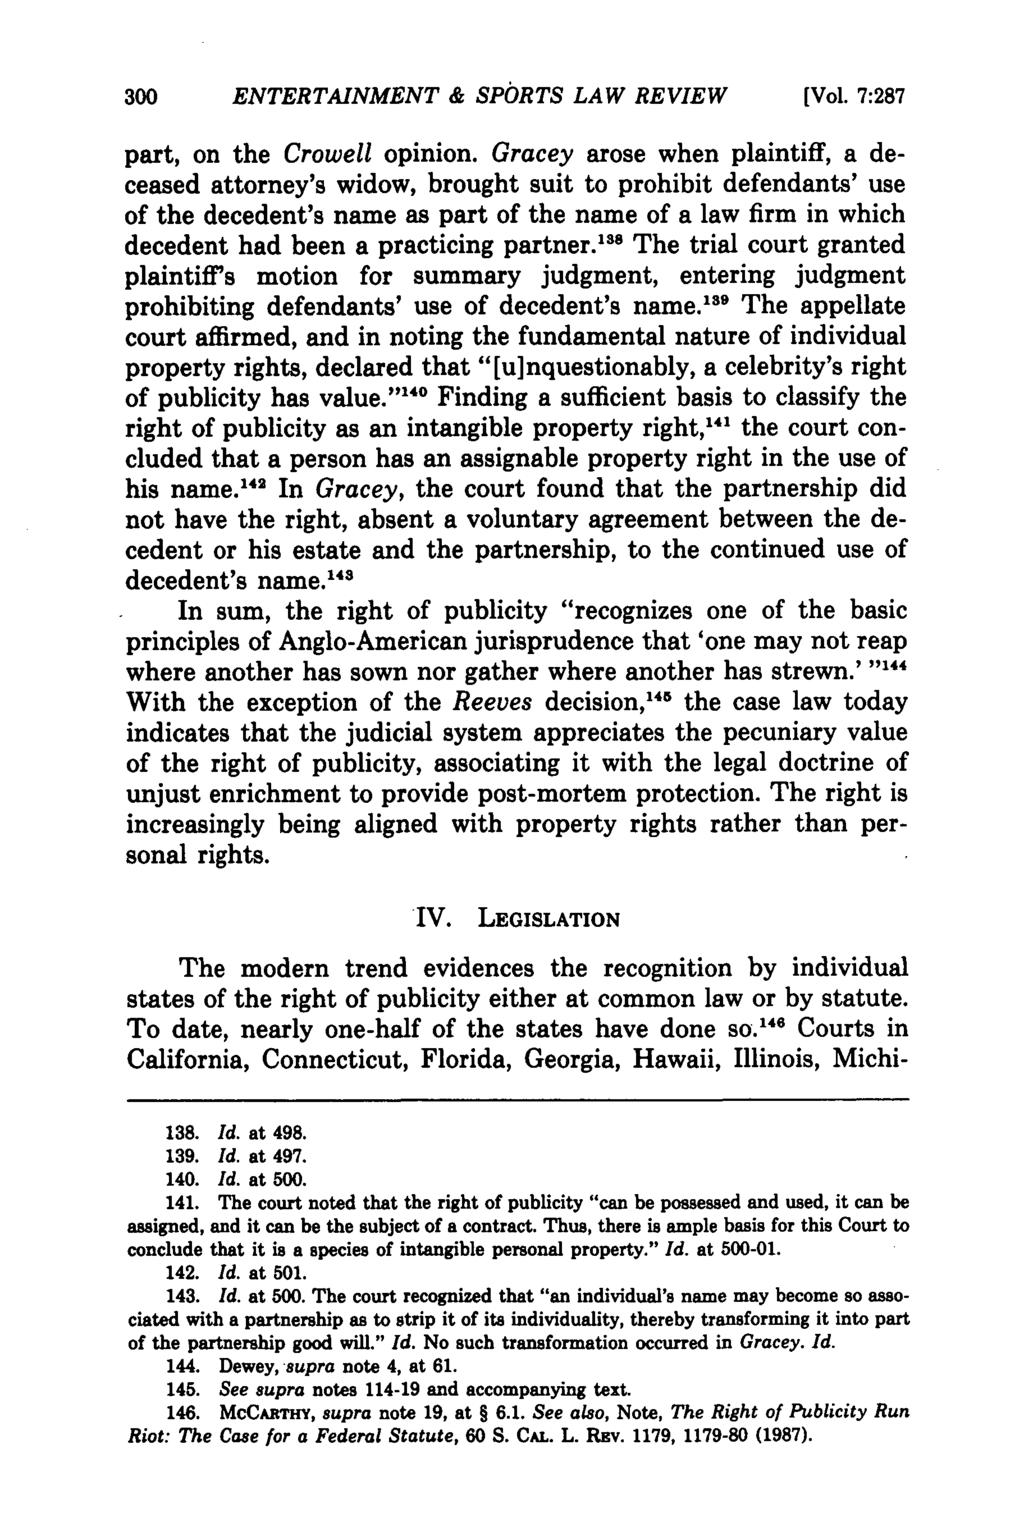 University of Miami Entertainment & Sports Law Review, Vol. 7, Iss. 2 [1990], Art. 5 ENTERTAINMENT & SPORTS LAW REVIEW [Vol. 7:287 part, on the Crowell opinion.